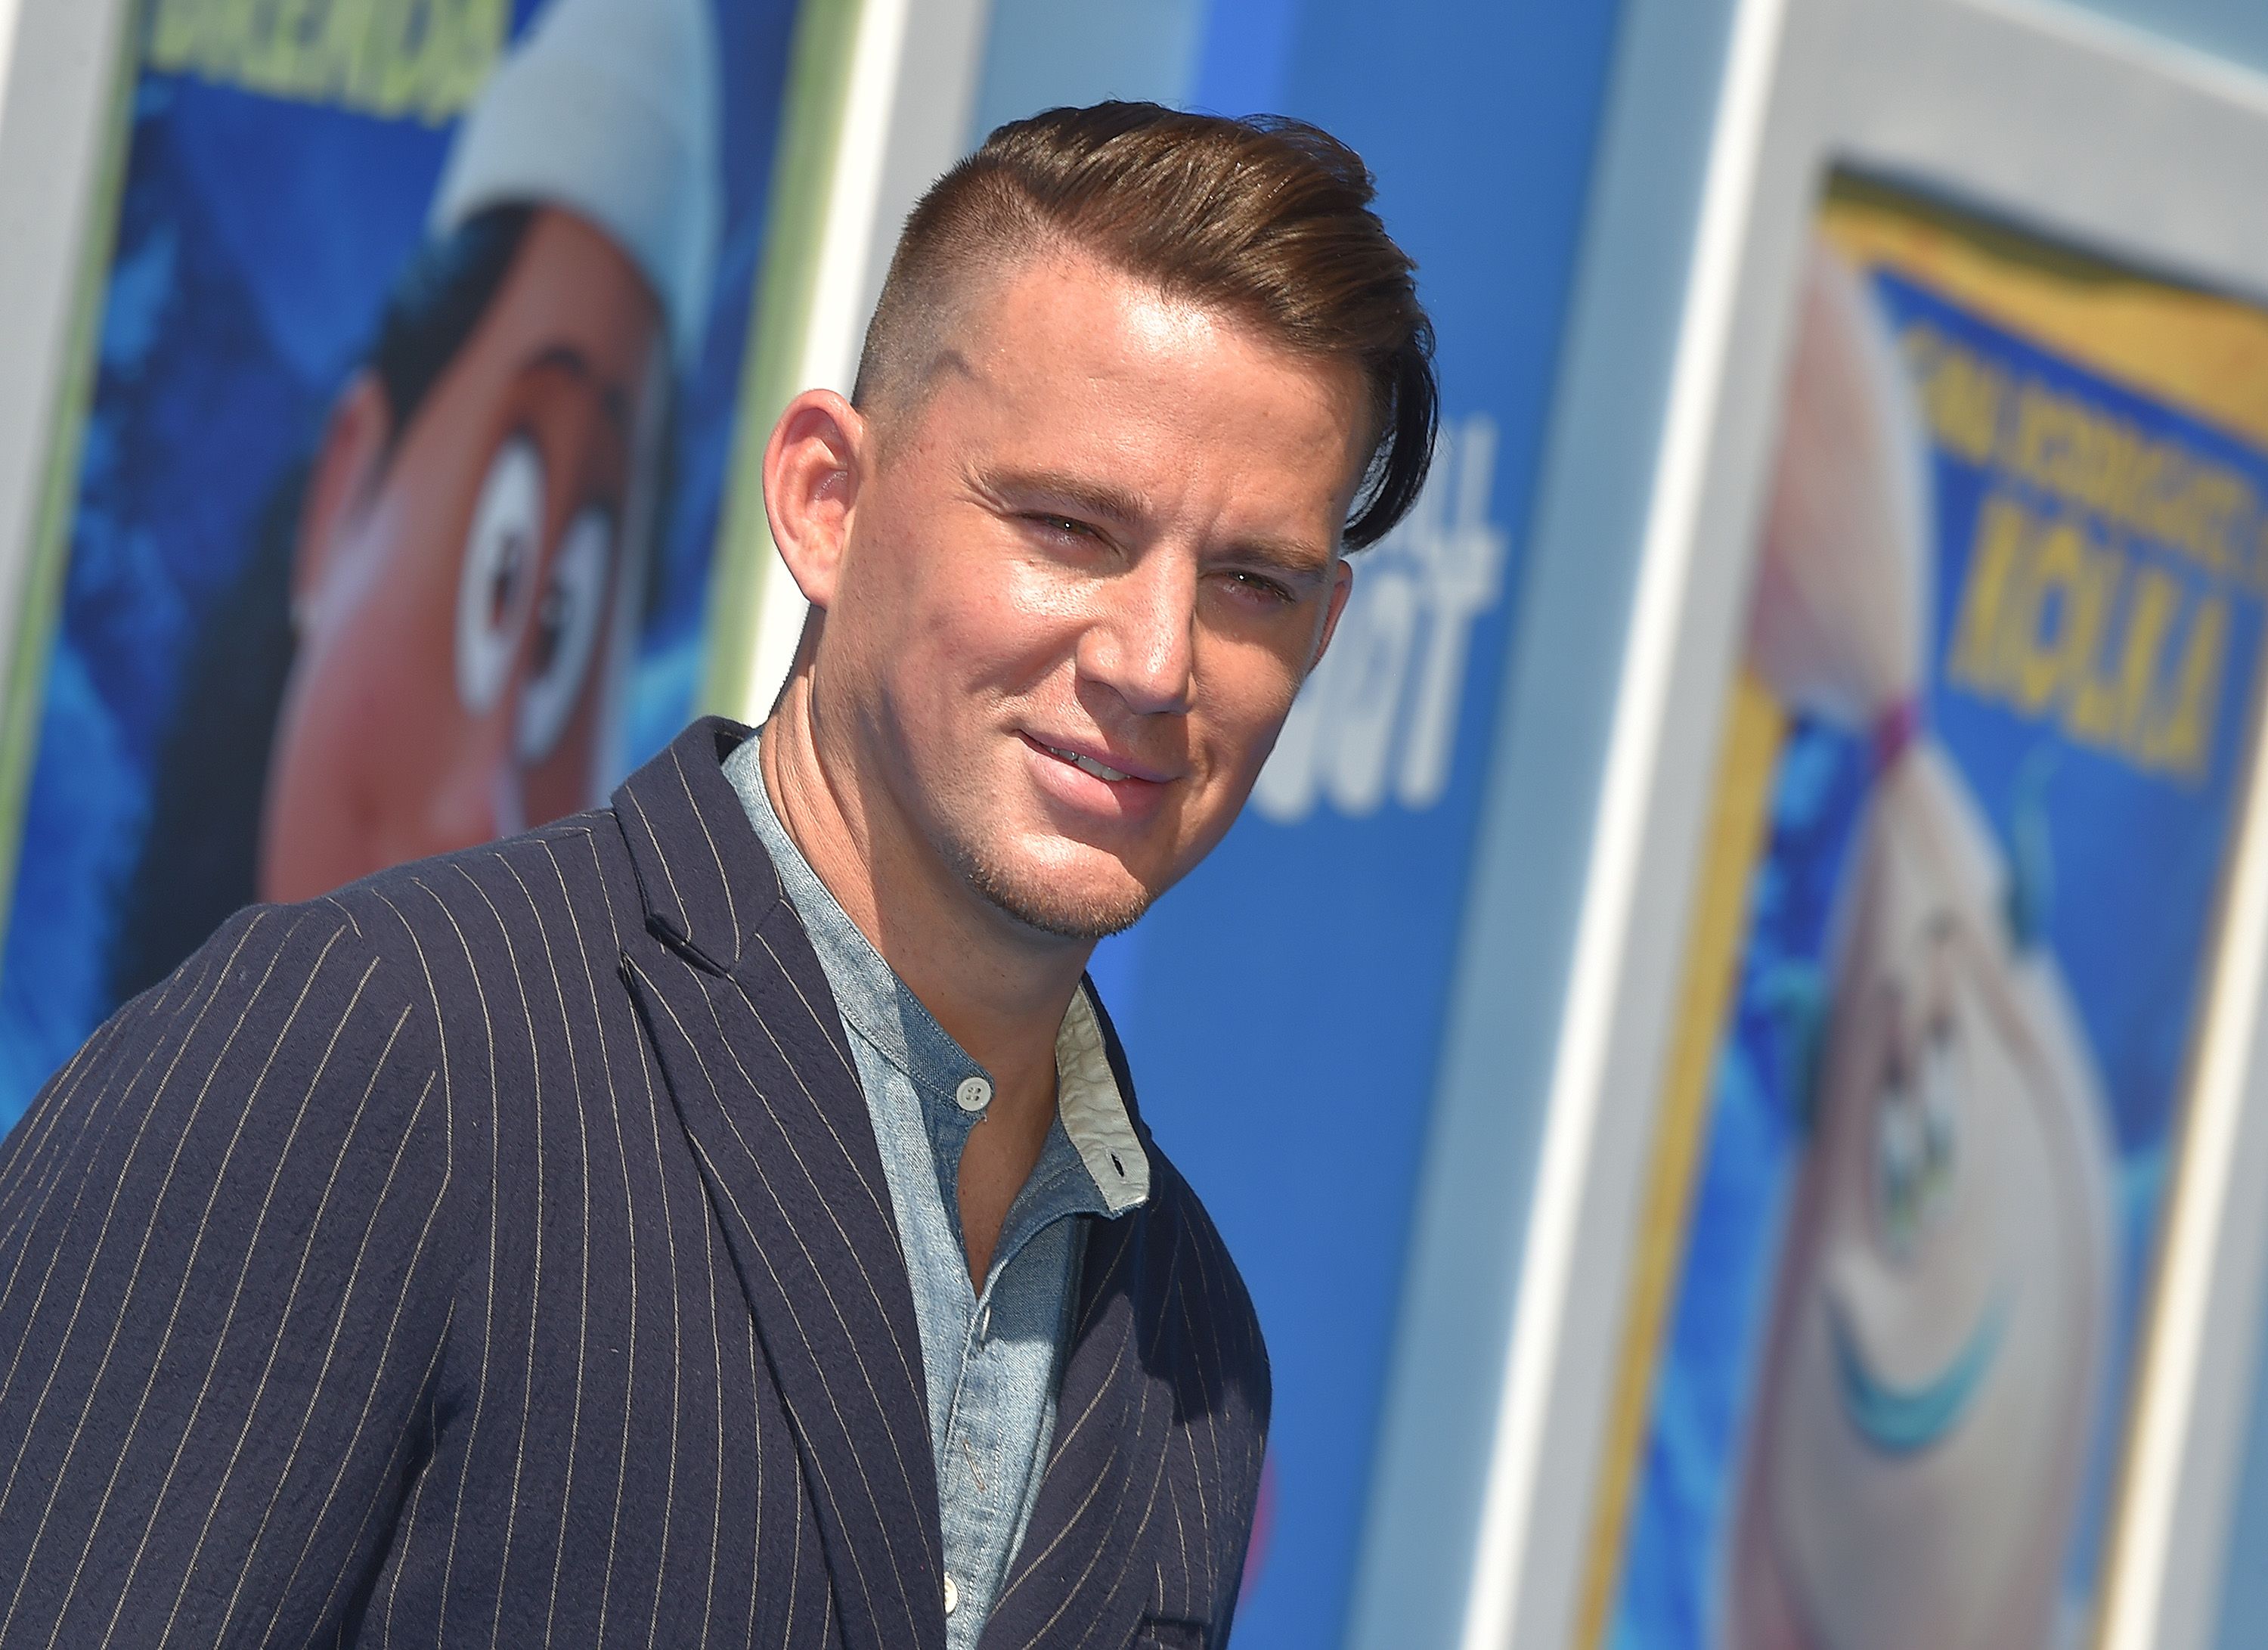 Channing Tatum shares naked shower photo after losing 